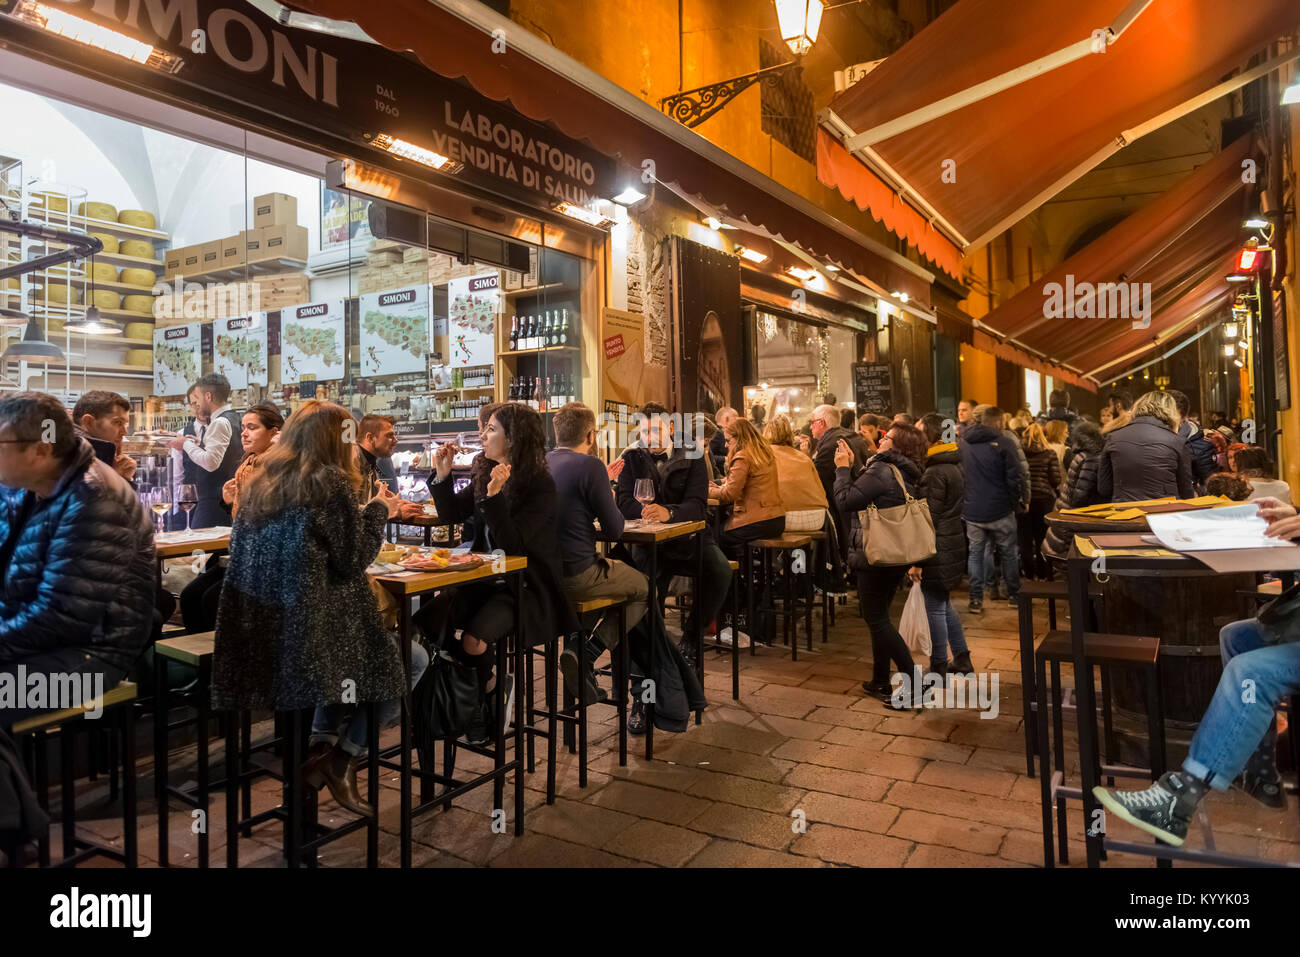 Bologna, Italy - People sitting out eating in restaurants, cafes and bars in Via Pescherie Vecchie, a street in Bologna city, Italy at night Stock Photo